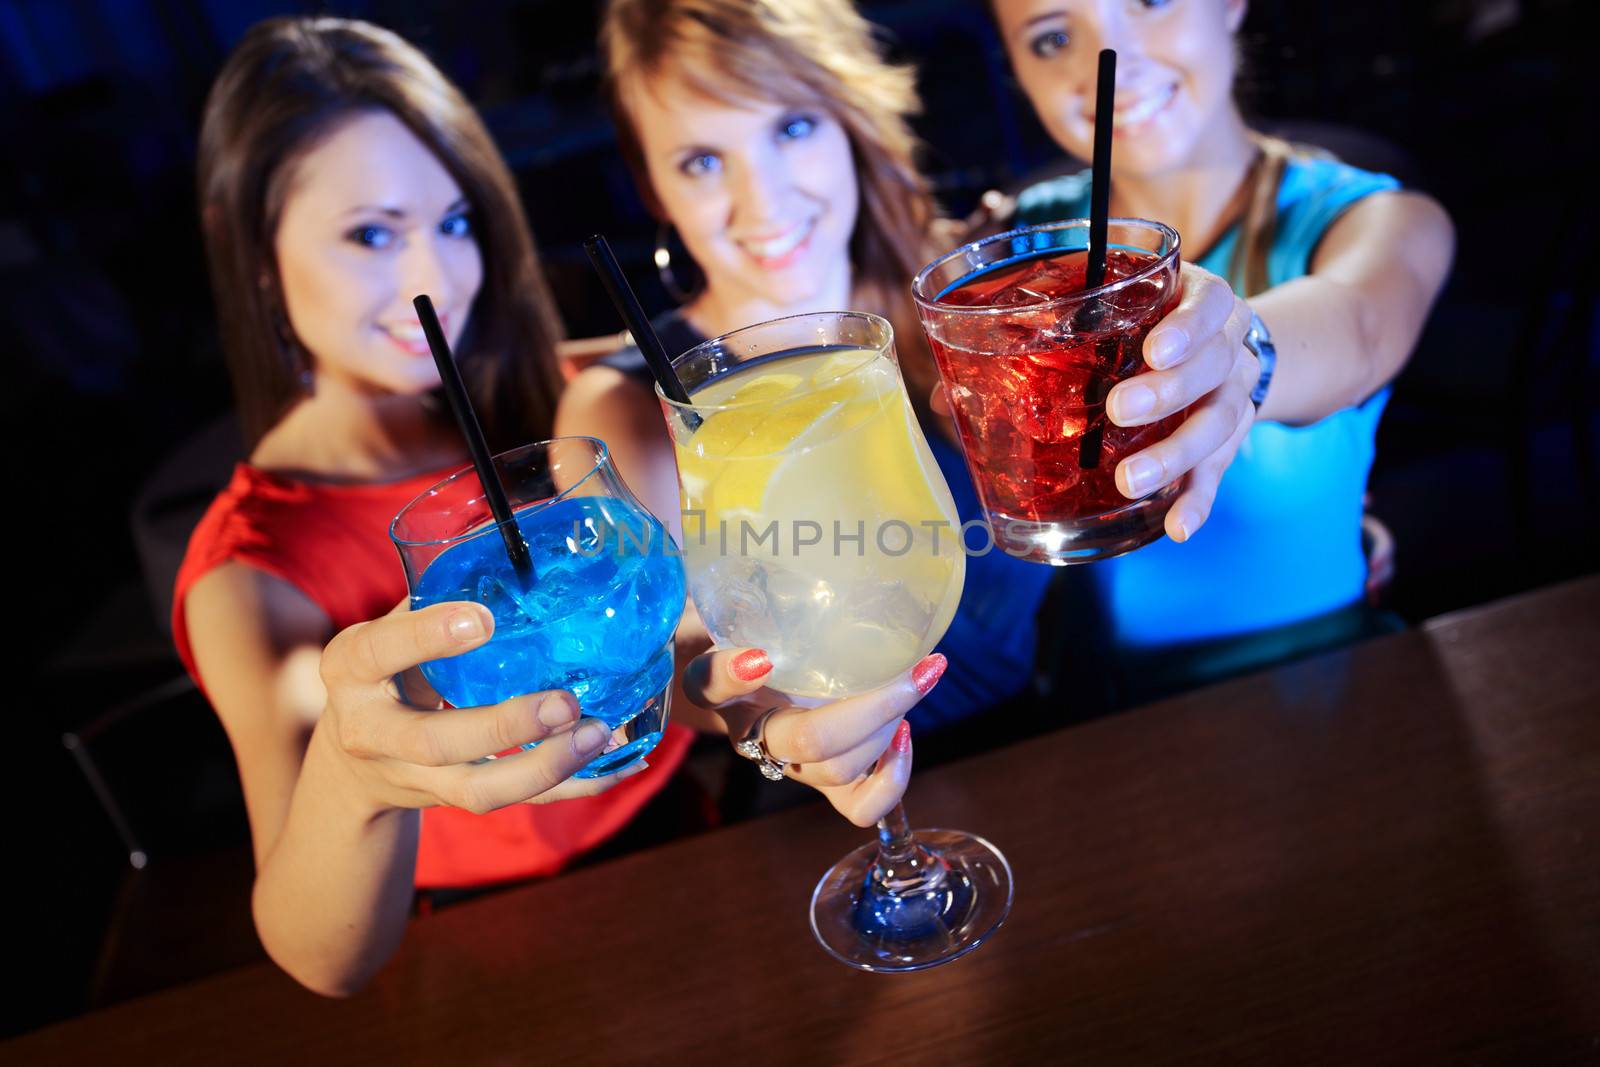 Group of happy beautiful young female friends celebrating in a nightclub with glasses of cocktail in their hands